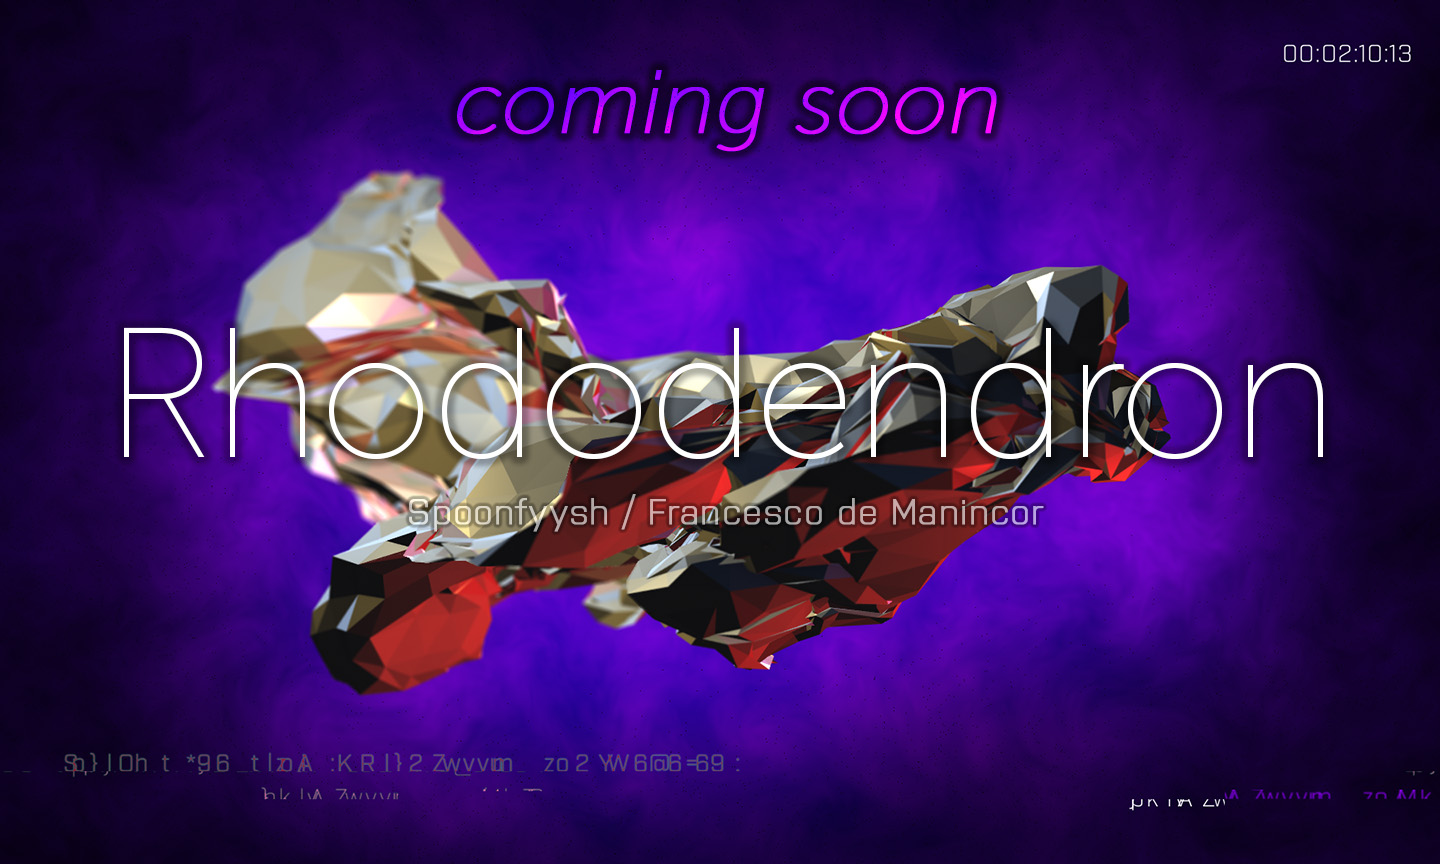 Rhododendron music and animation coming soon